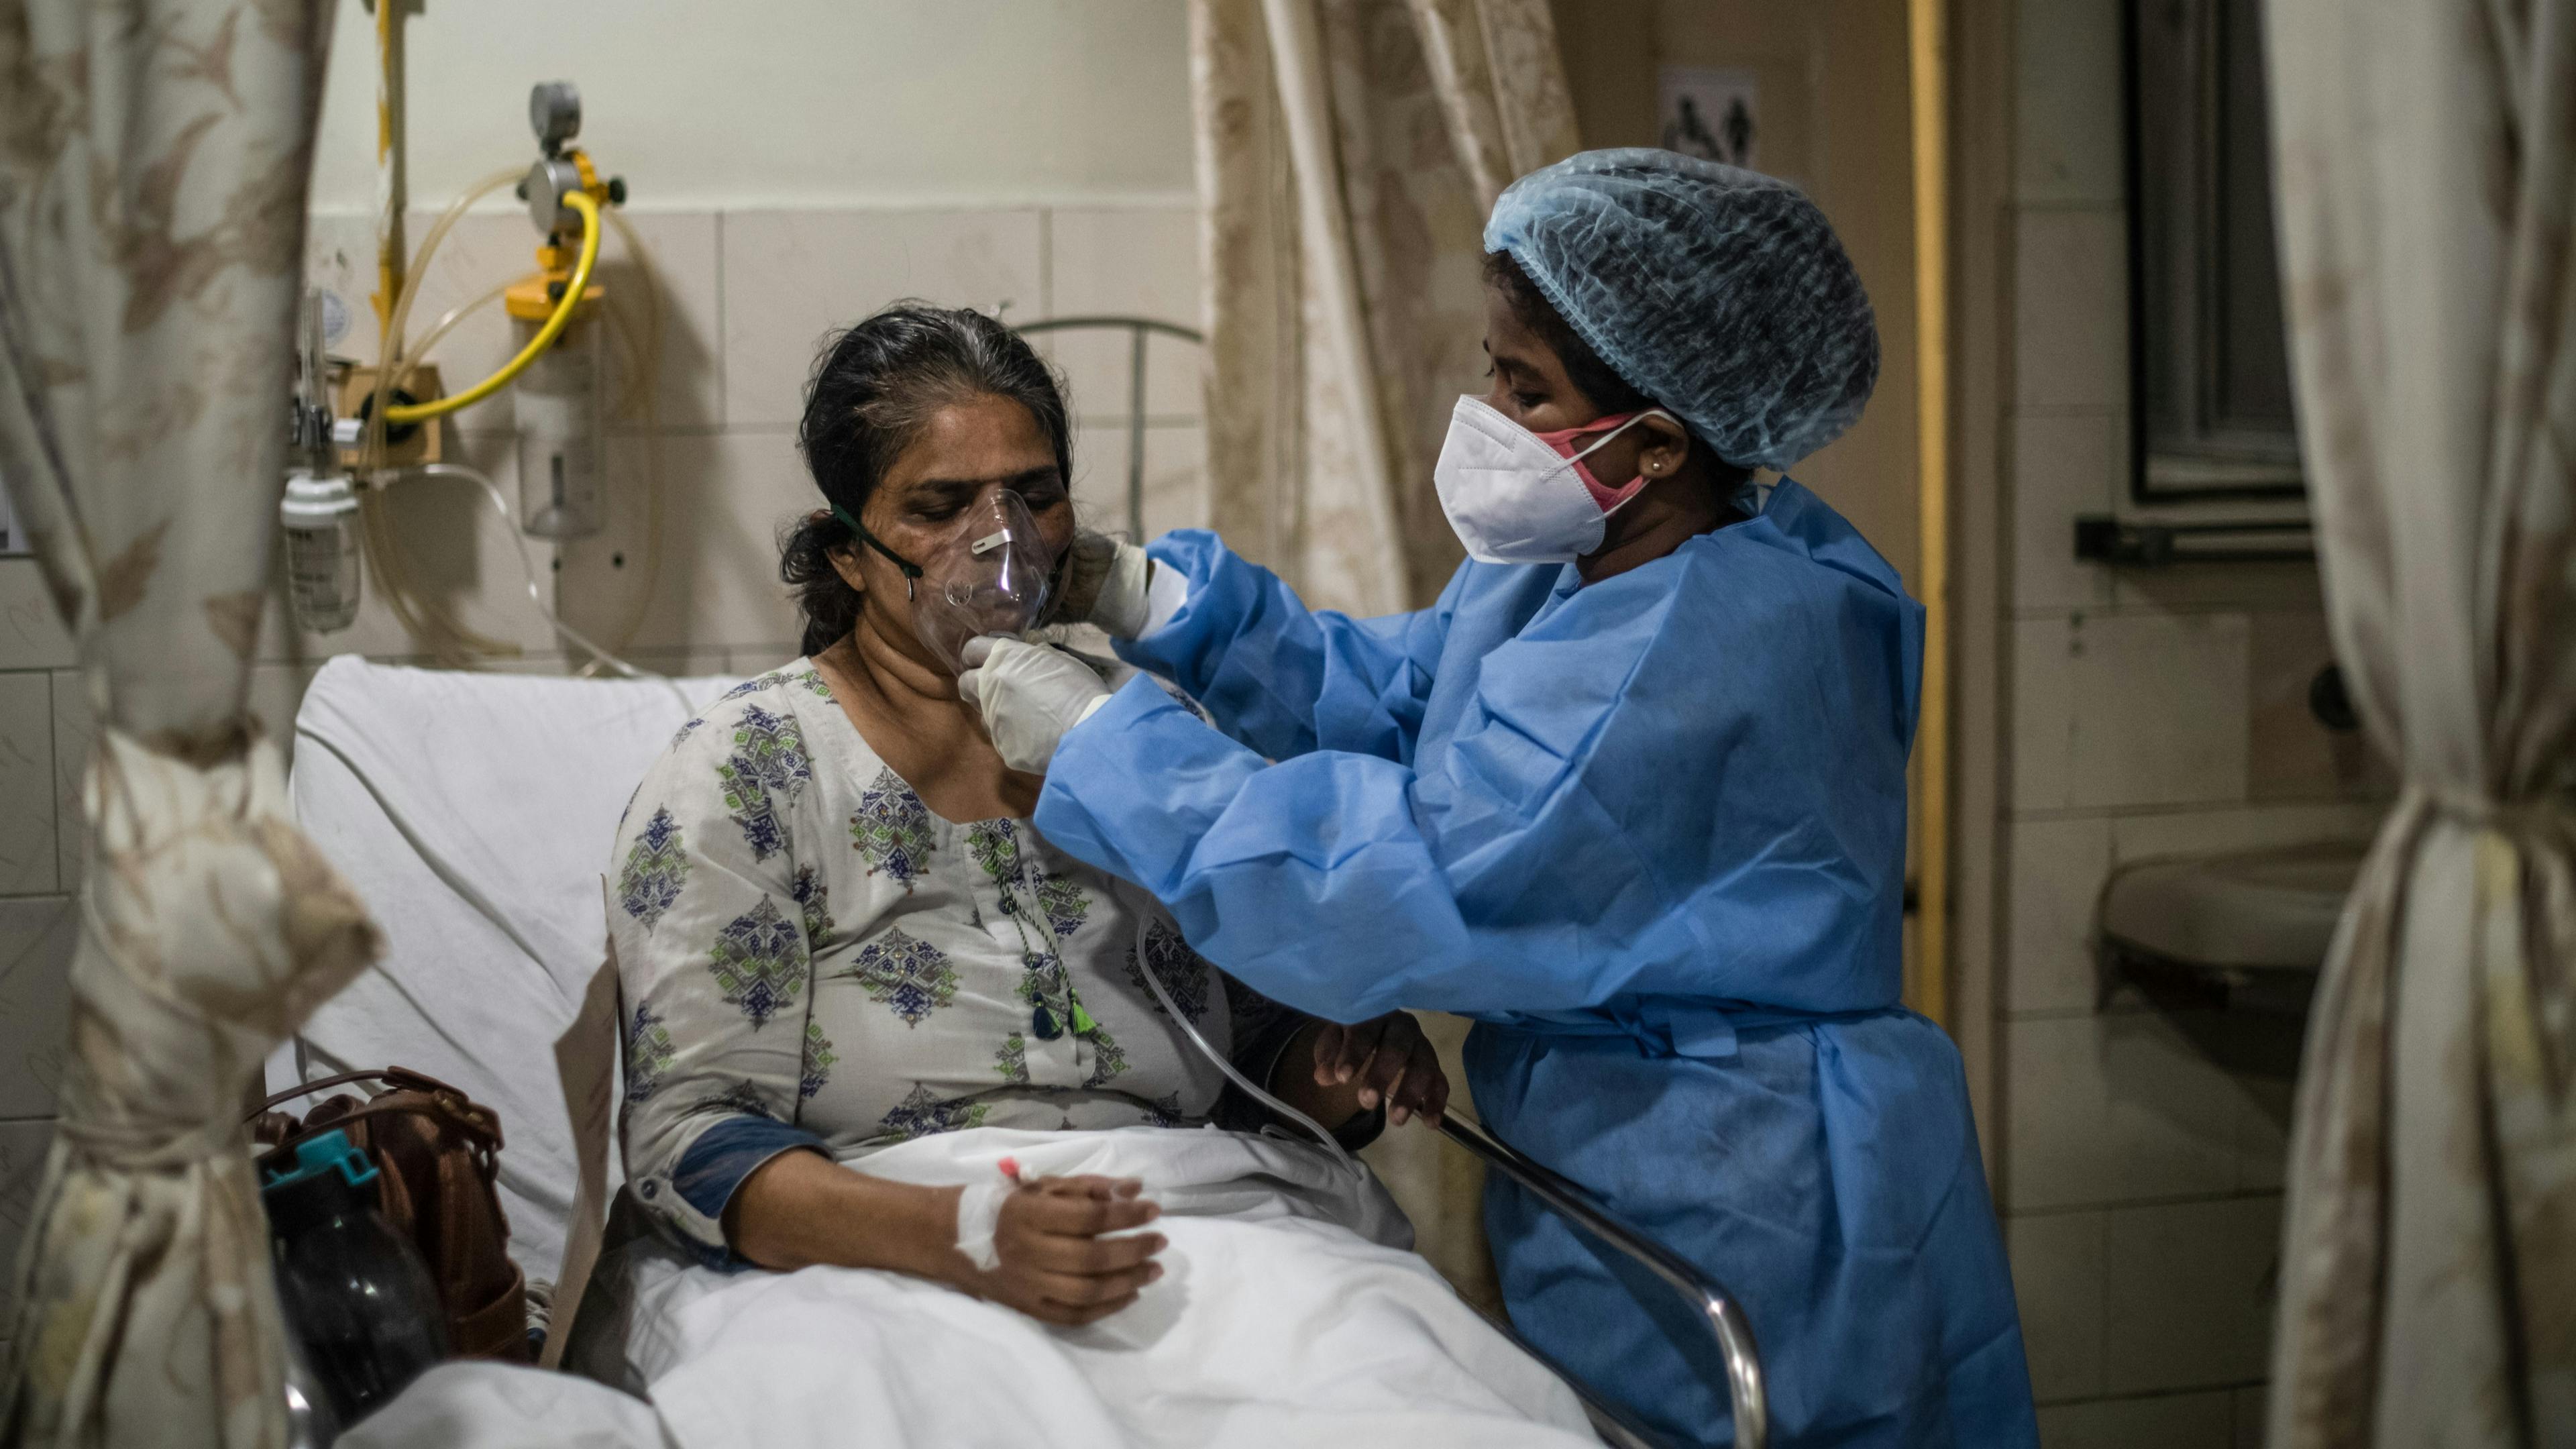 Medical staff attend to Covid-19 positive patients in the emergency ward in New Delhi, India.